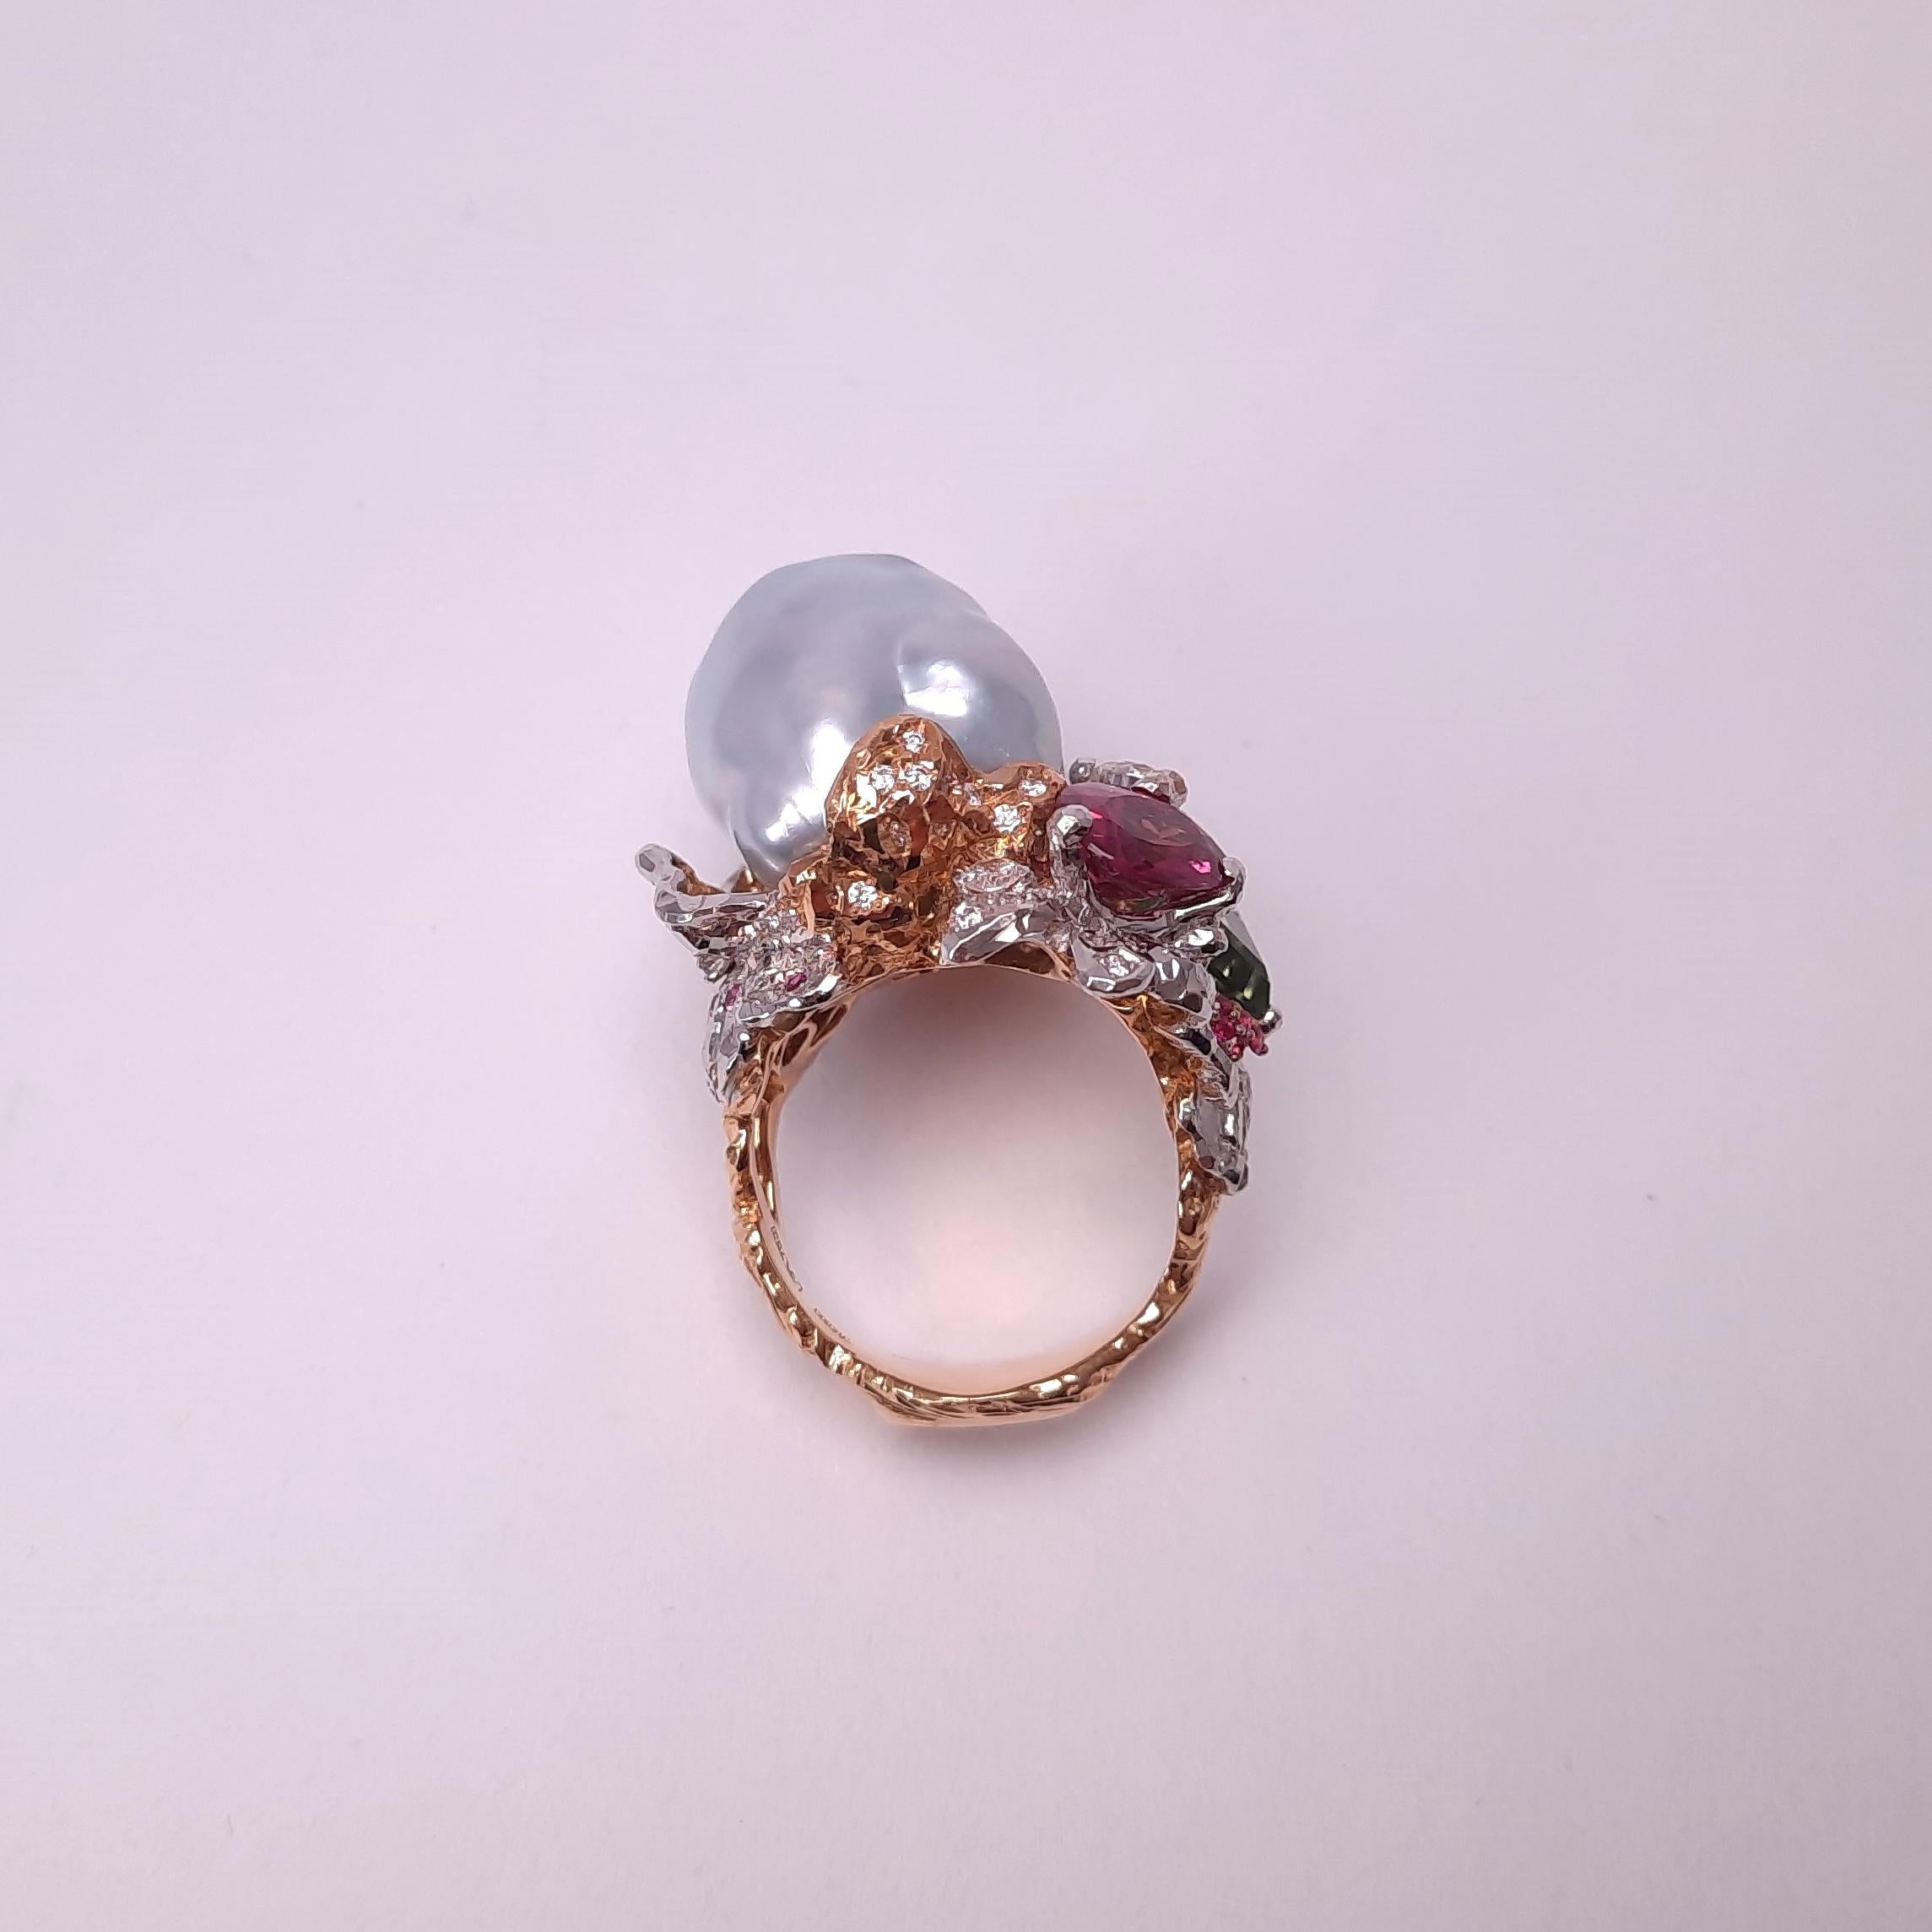 Inspired by Impressionism, MOISEIKIN has created a peach-like blooming flower ring  in tridimensional manner. Trembling flowers and sweet fragrance of coming ripe fruits are embodied  in gems and metals. A large unique baroque pearl is skillfully